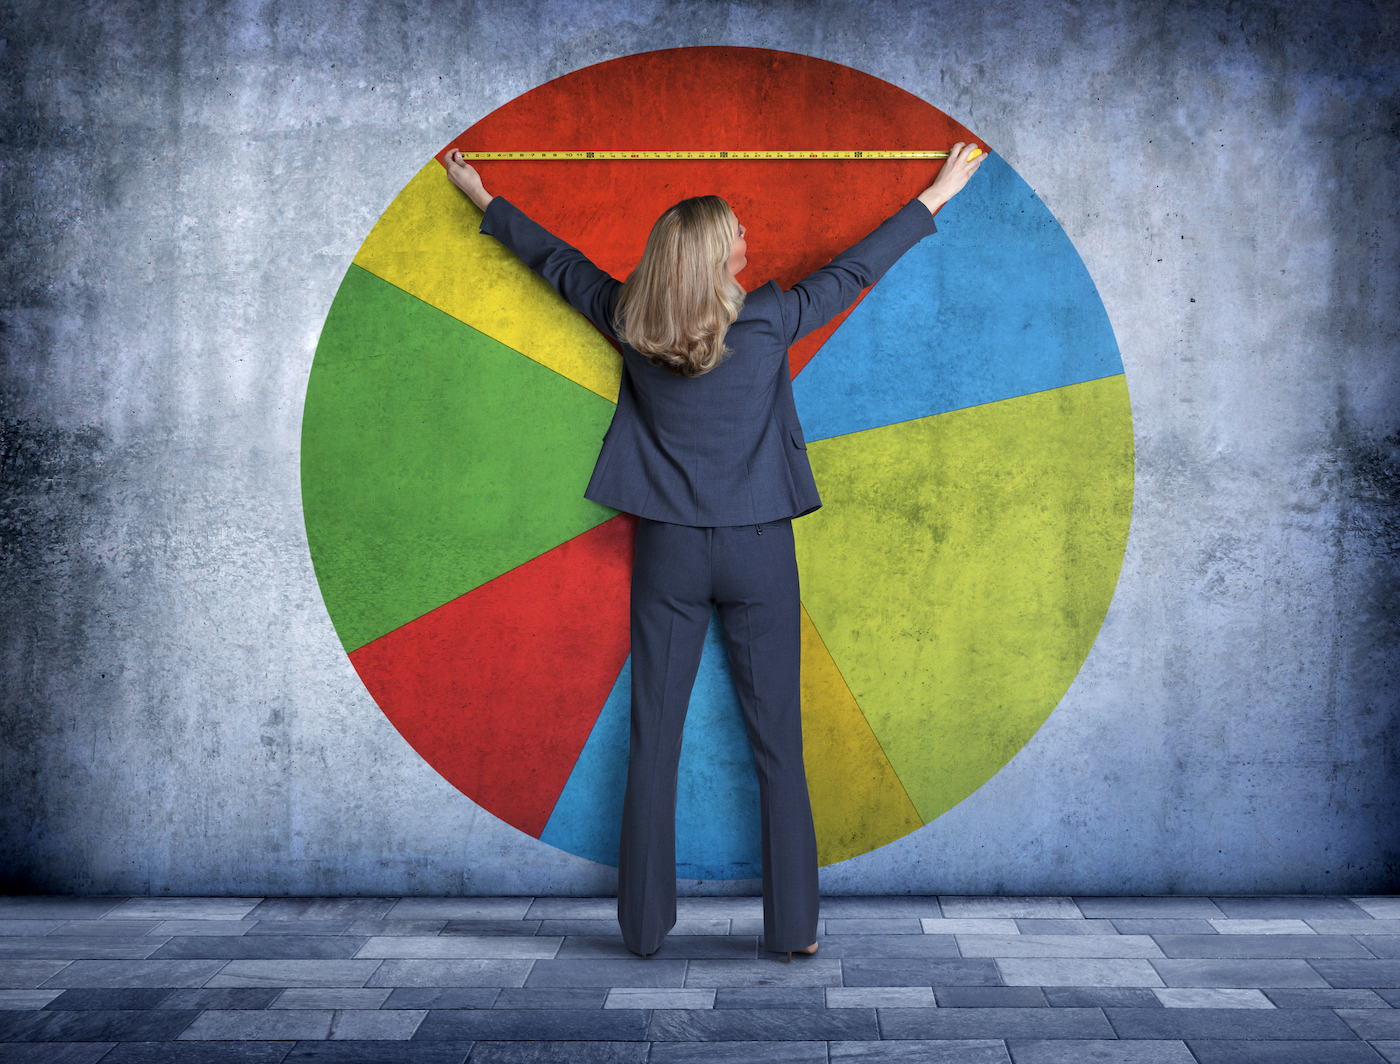 A businesswoman, using a tape measure, reaches up to measure her piece of the pie on a large pie chart that is projected onto a concrete wall.